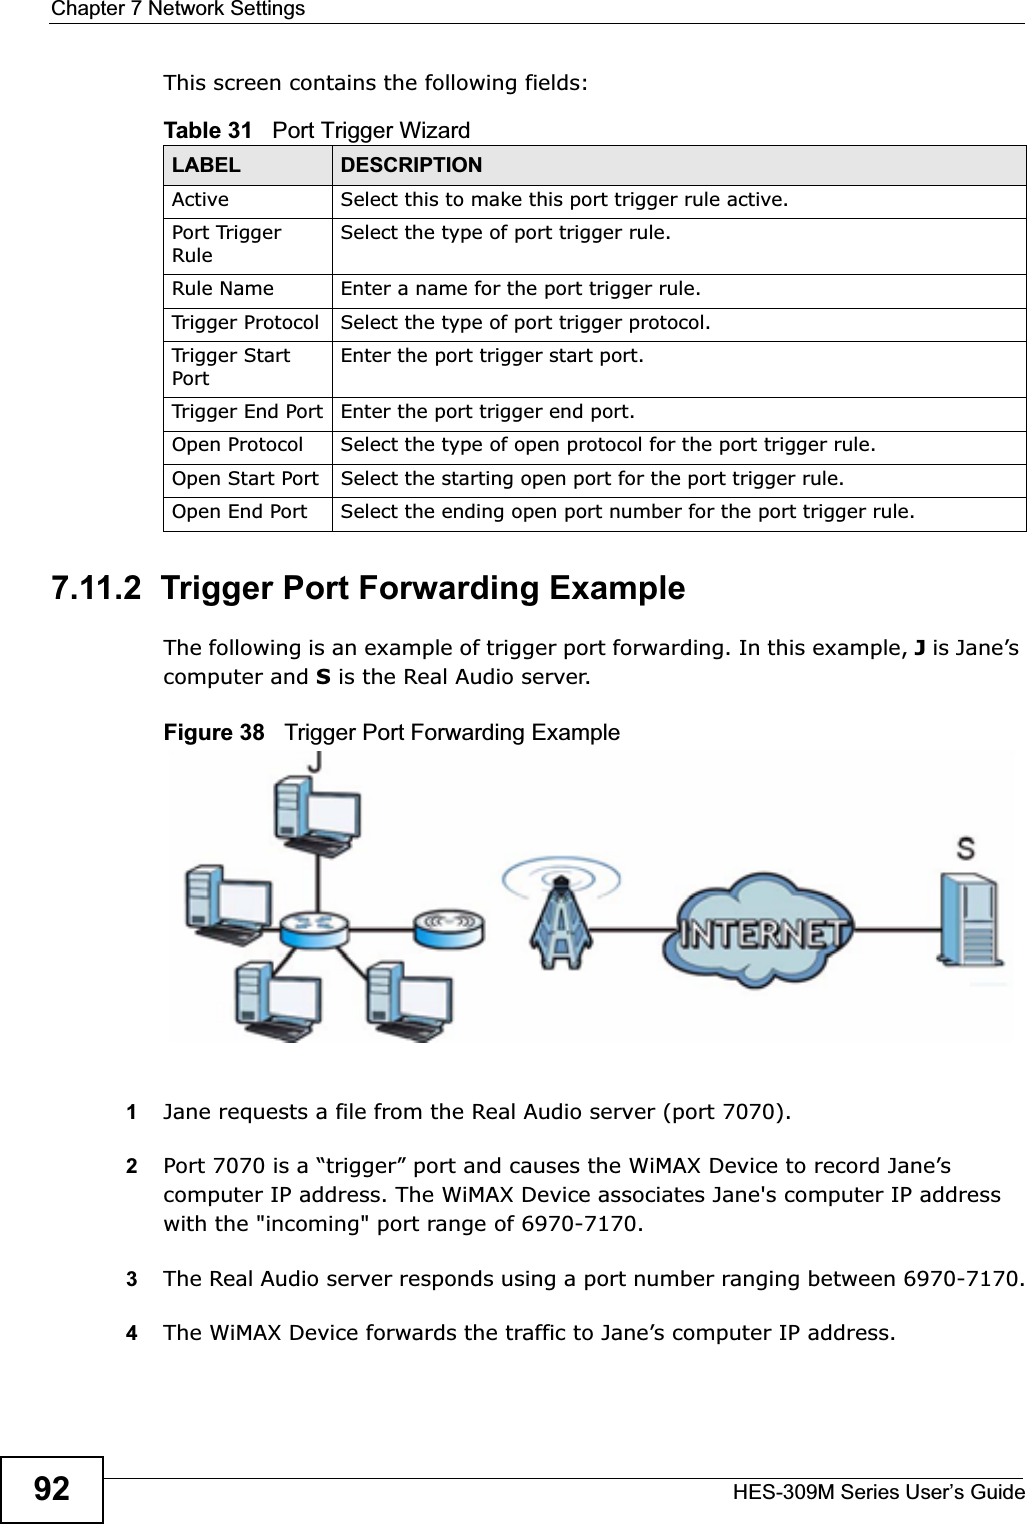 Chapter 7 Network SettingsHES-309M Series User’s Guide92This screen contains the following fields:7.11.2  Trigger Port Forwarding ExampleThe following is an example of trigger port forwarding. In this example, J is Jane’s computer and S is the Real Audio server.Figure 38   Trigger Port Forwarding Example1Jane requests a file from the Real Audio server (port 7070).2Port 7070 is a “trigger” port and causes the WiMAX Device to record Jane’s computer IP address. The WiMAX Device associates Jane&apos;s computer IP address with the &quot;incoming&quot; port range of 6970-7170.3The Real Audio server responds using a port number ranging between 6970-7170.4The WiMAX Device forwards the traffic to Jane’s computer IP address. Table 31   Port Trigger WizardLABEL DESCRIPTIONActive Select this to make this port trigger rule active.Port Trigger RuleSelect the type of port trigger rule.Rule Name Enter a name for the port trigger rule.Trigger Protocol Select the type of port trigger protocol.Trigger  Start PortEnter the port trigger start port.Trigger End Port Enter the port trigger end port.Open Protocol Select the type of open protocol for the port trigger rule.Open Start Port Select the starting open port for the port trigger rule.Open End Port Select the ending open port number for the port trigger rule.